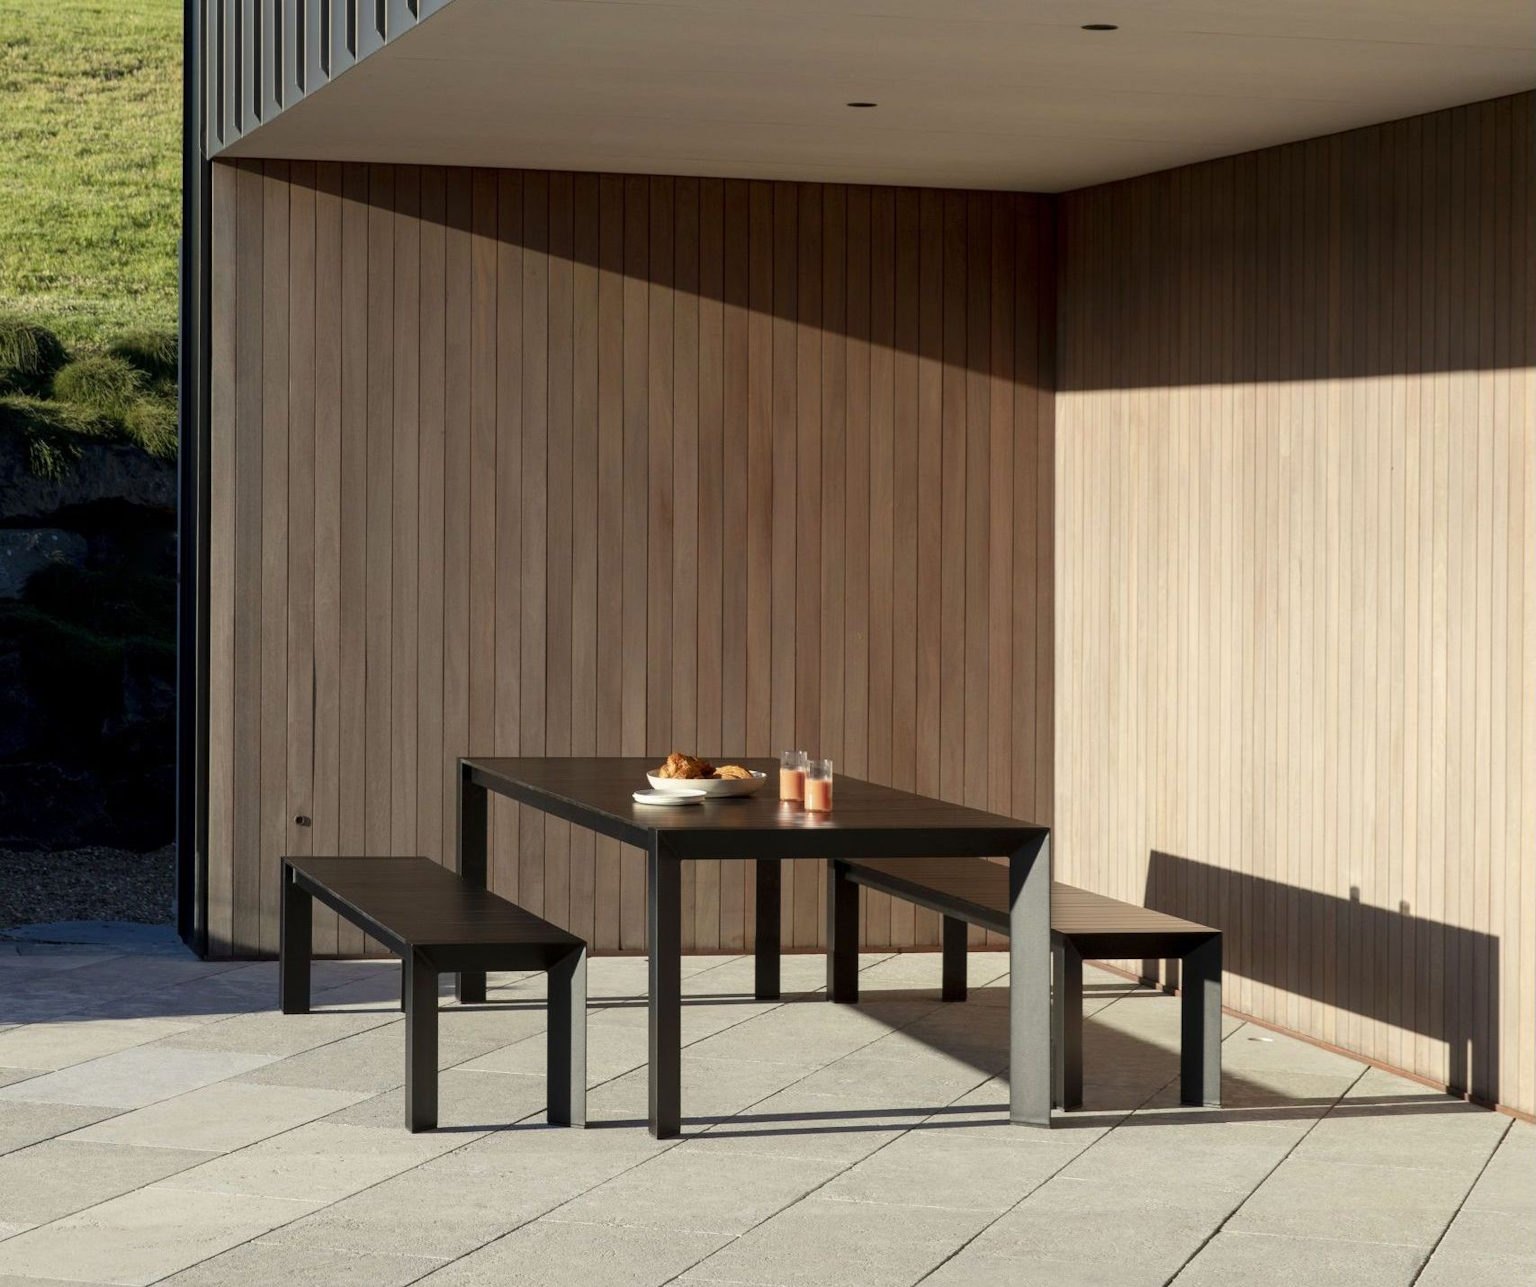 Ashwood Outdoor Dining Set in the morning sun